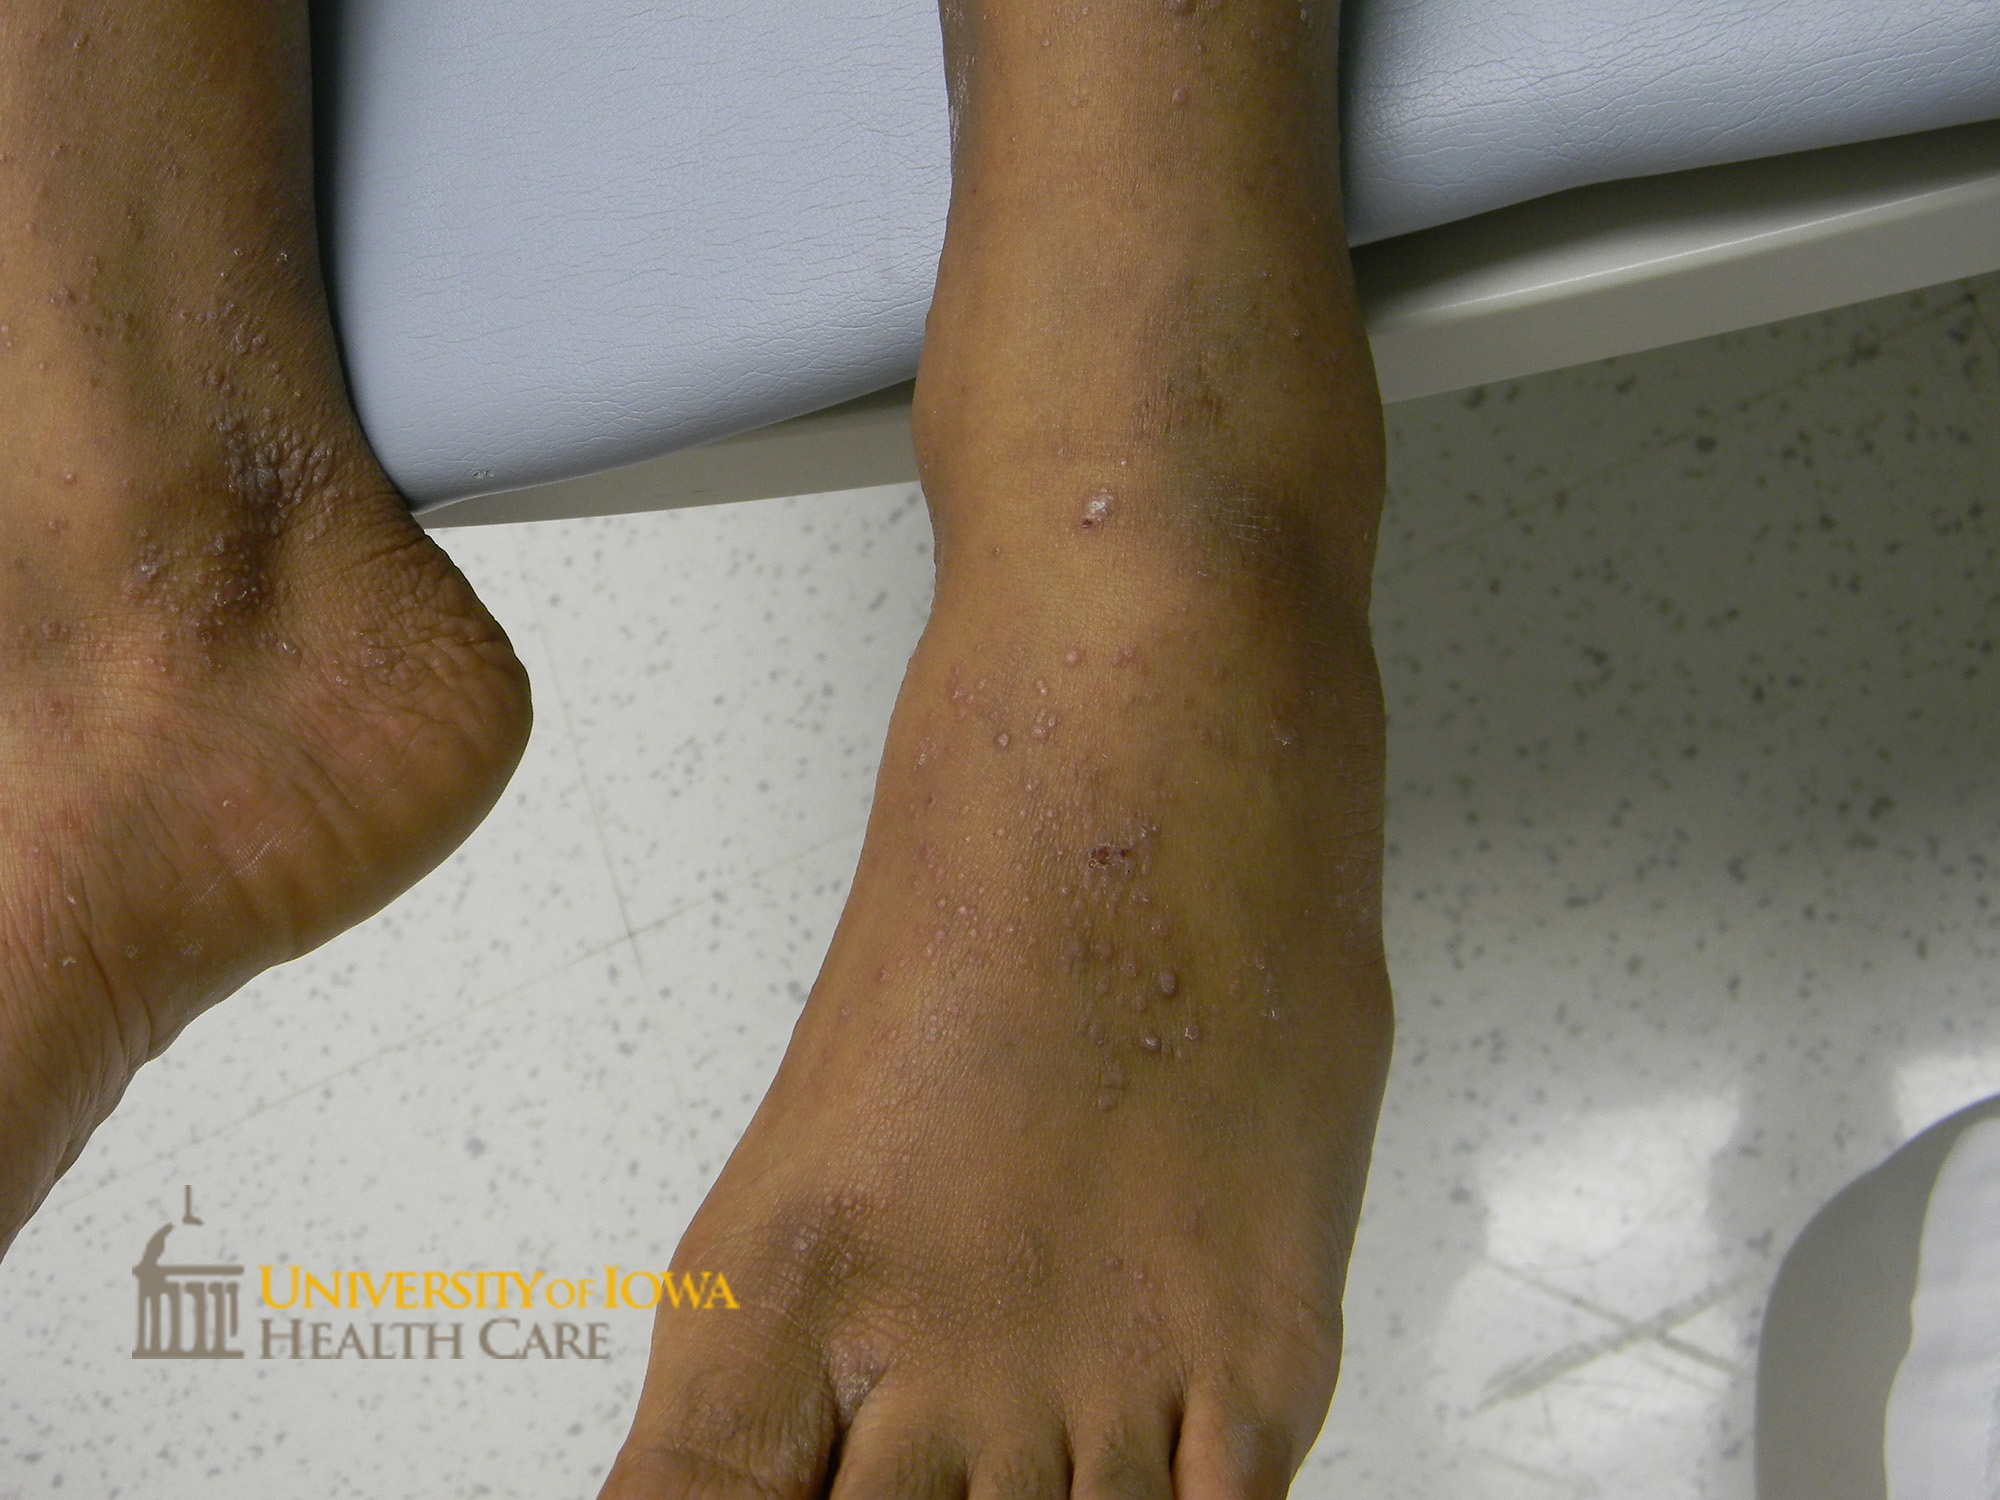 Pink to violaceous polygonal papules with overlying white scale on the lower legs. (click images for higher resolution).